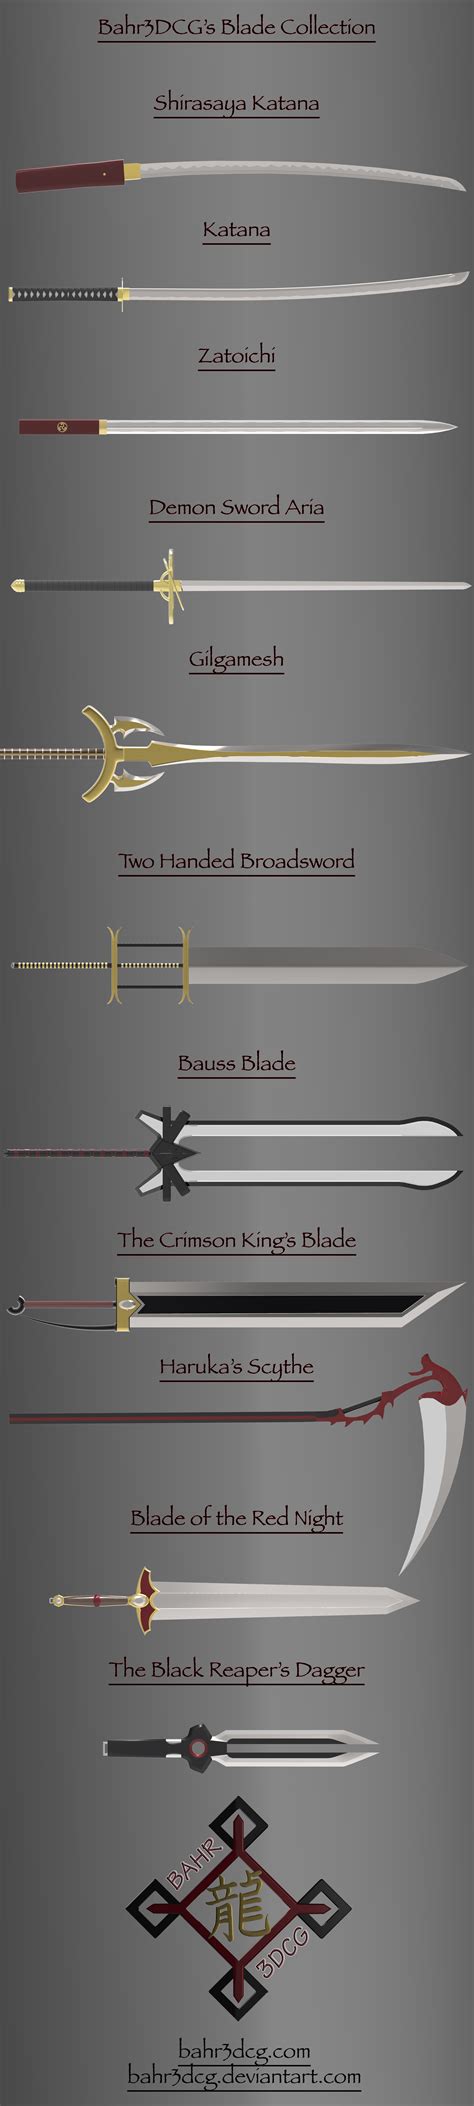 hd bladed weapons collection  bahrdcg  deviantart